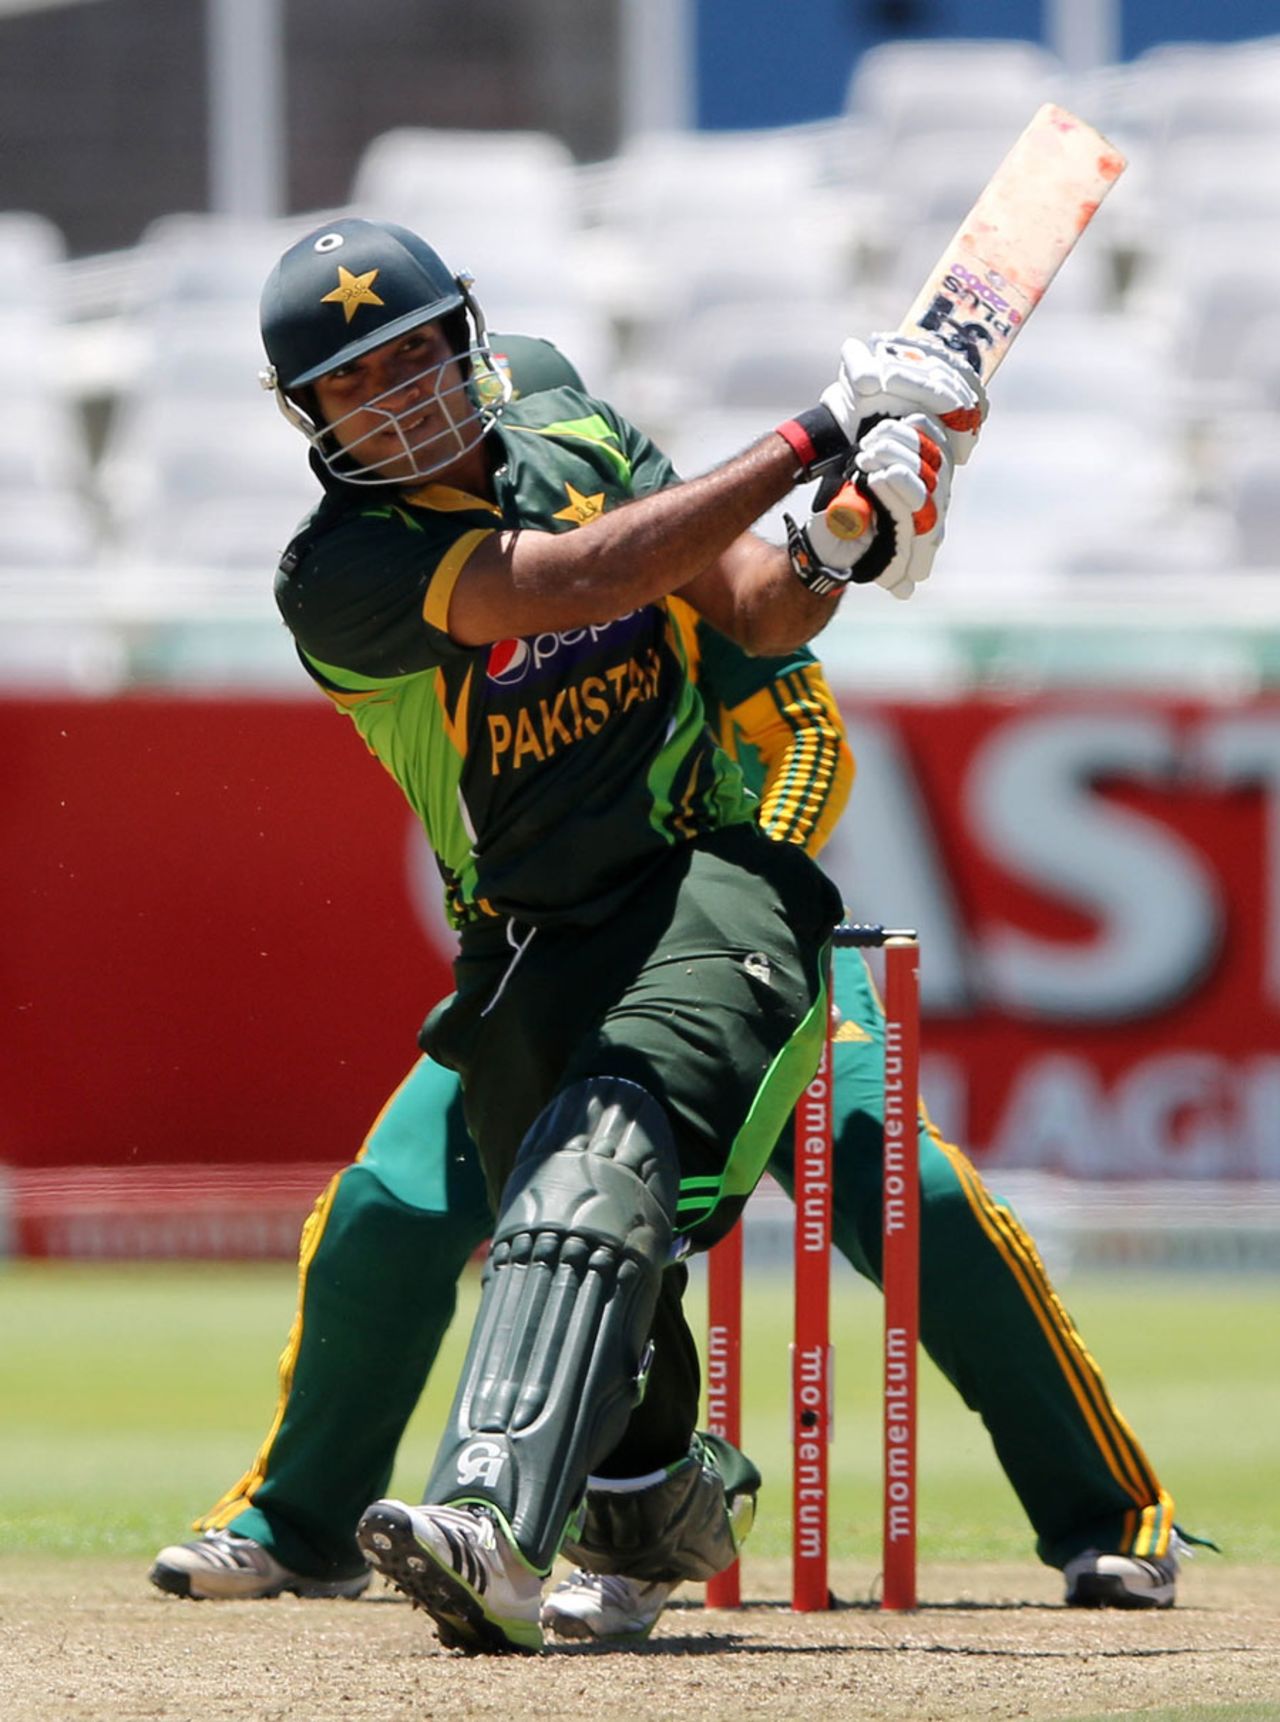 Misbah-ul-Haq hits over the top, South Africa v Pakistan, 1st ODI, Cape Town, November 24, 2013